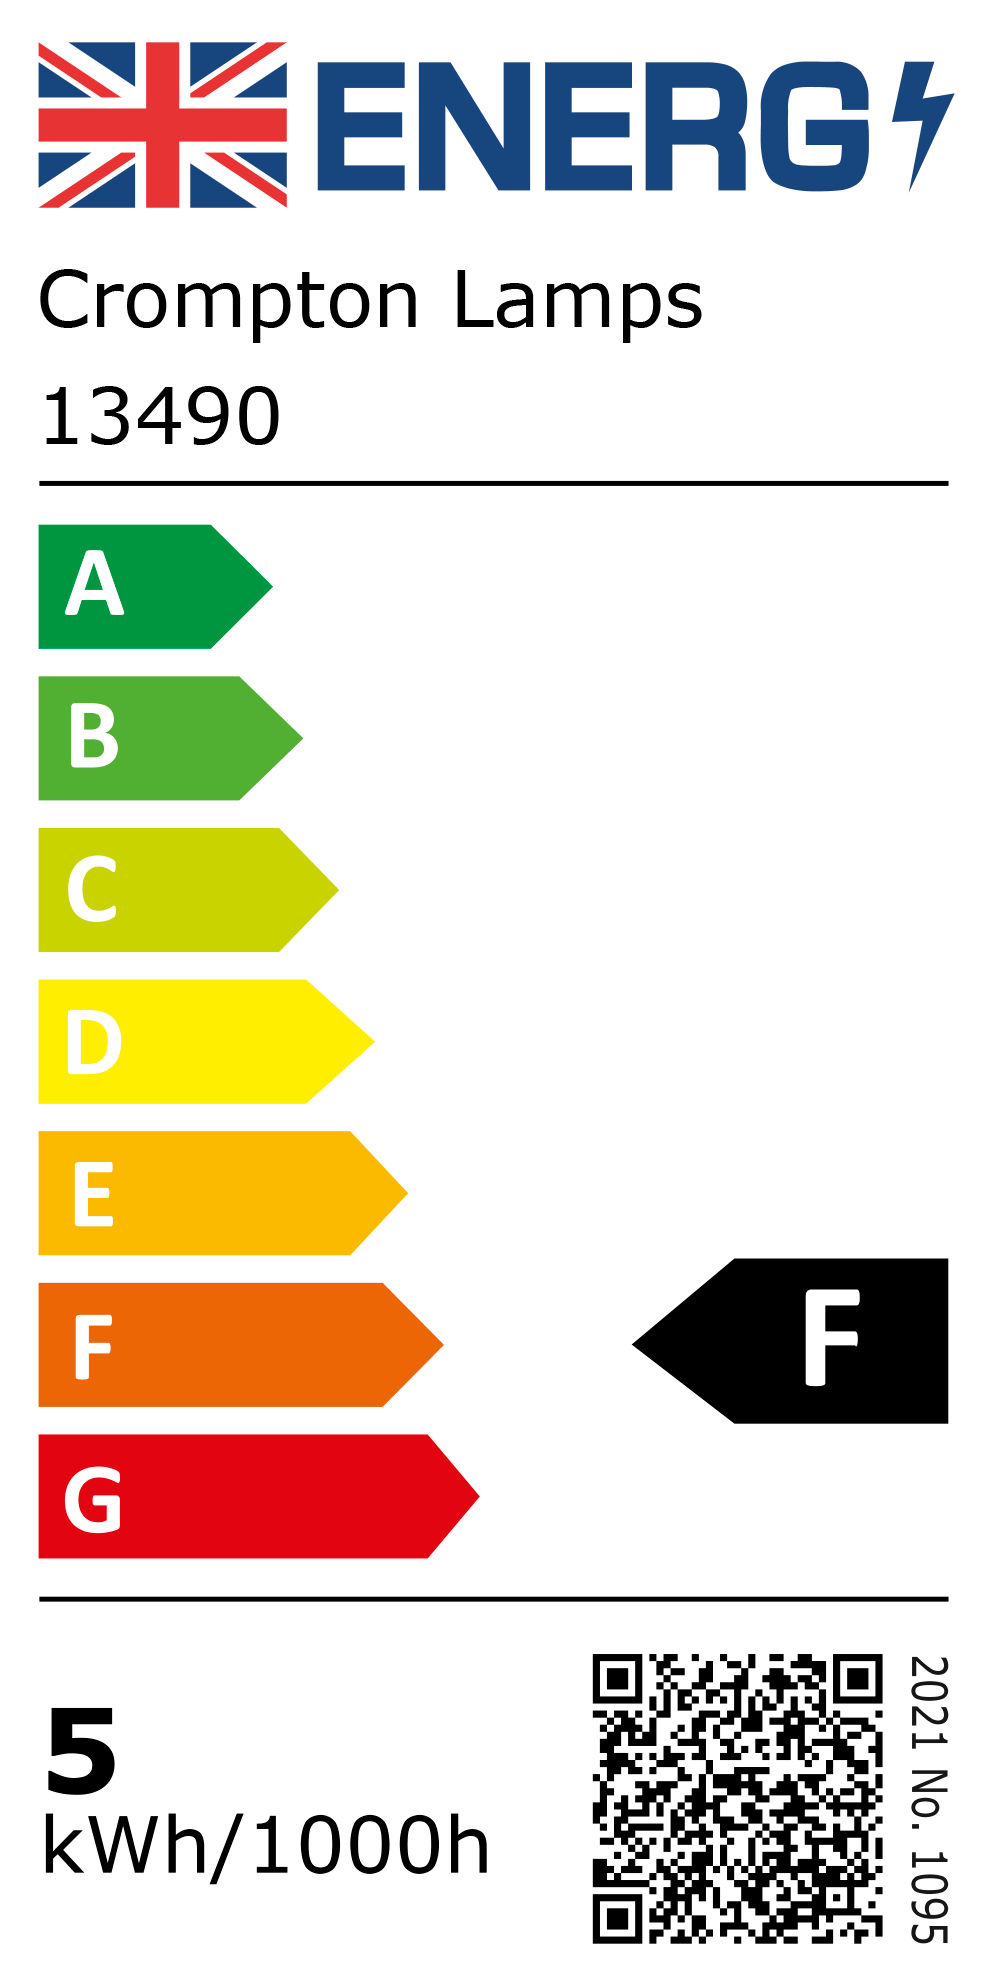 New 2021 Energy Rating Label: Stock Code 13490